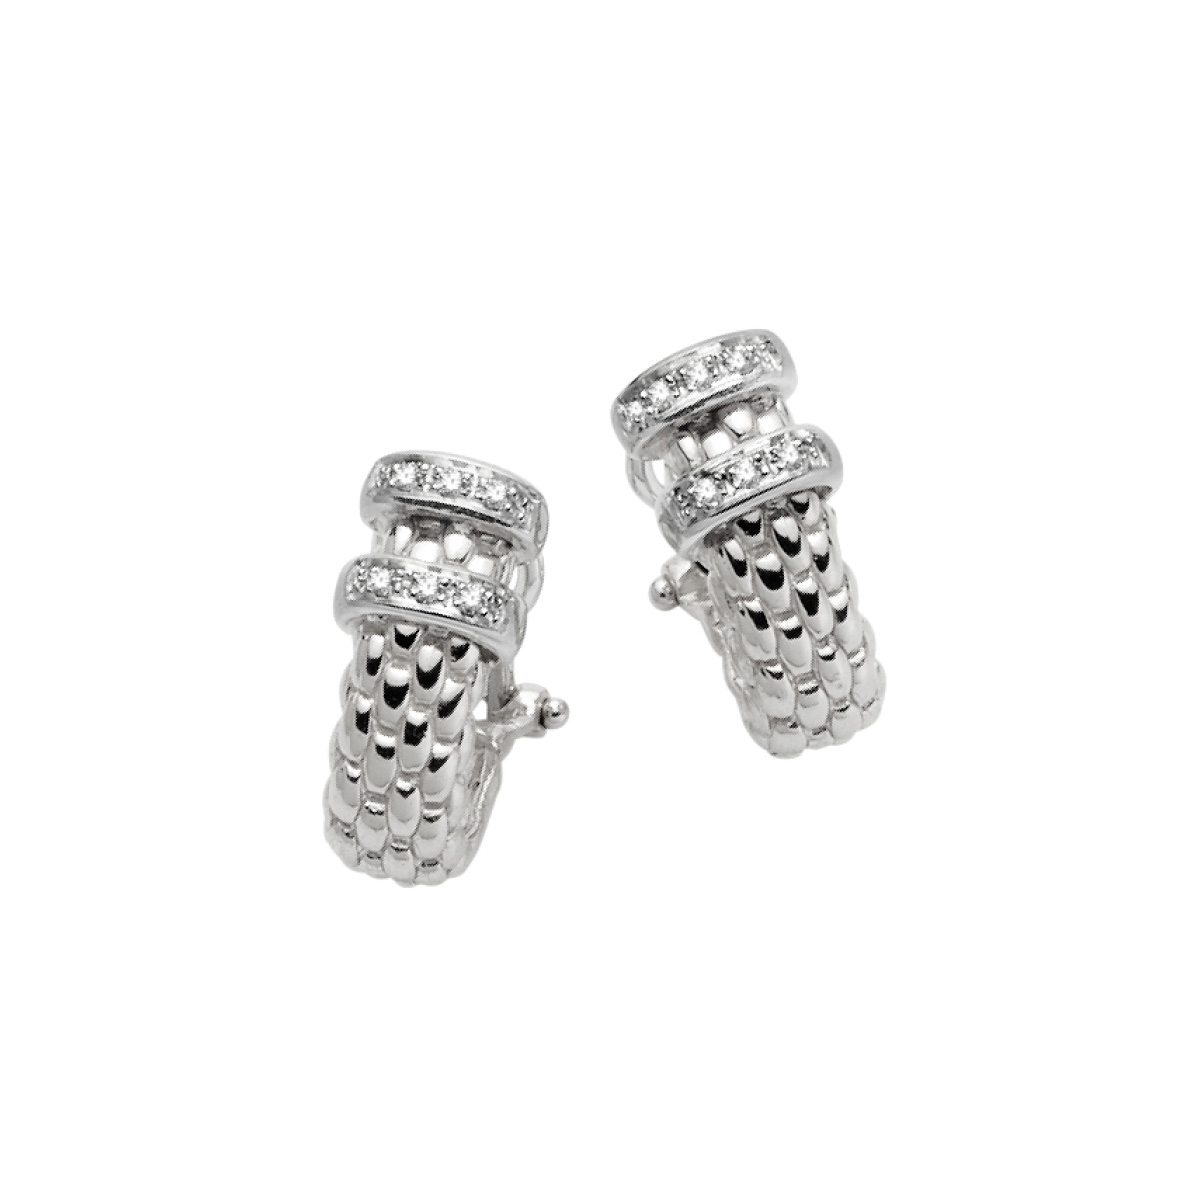 Fope Solo Collection Earrings in White Gold and Diamonds